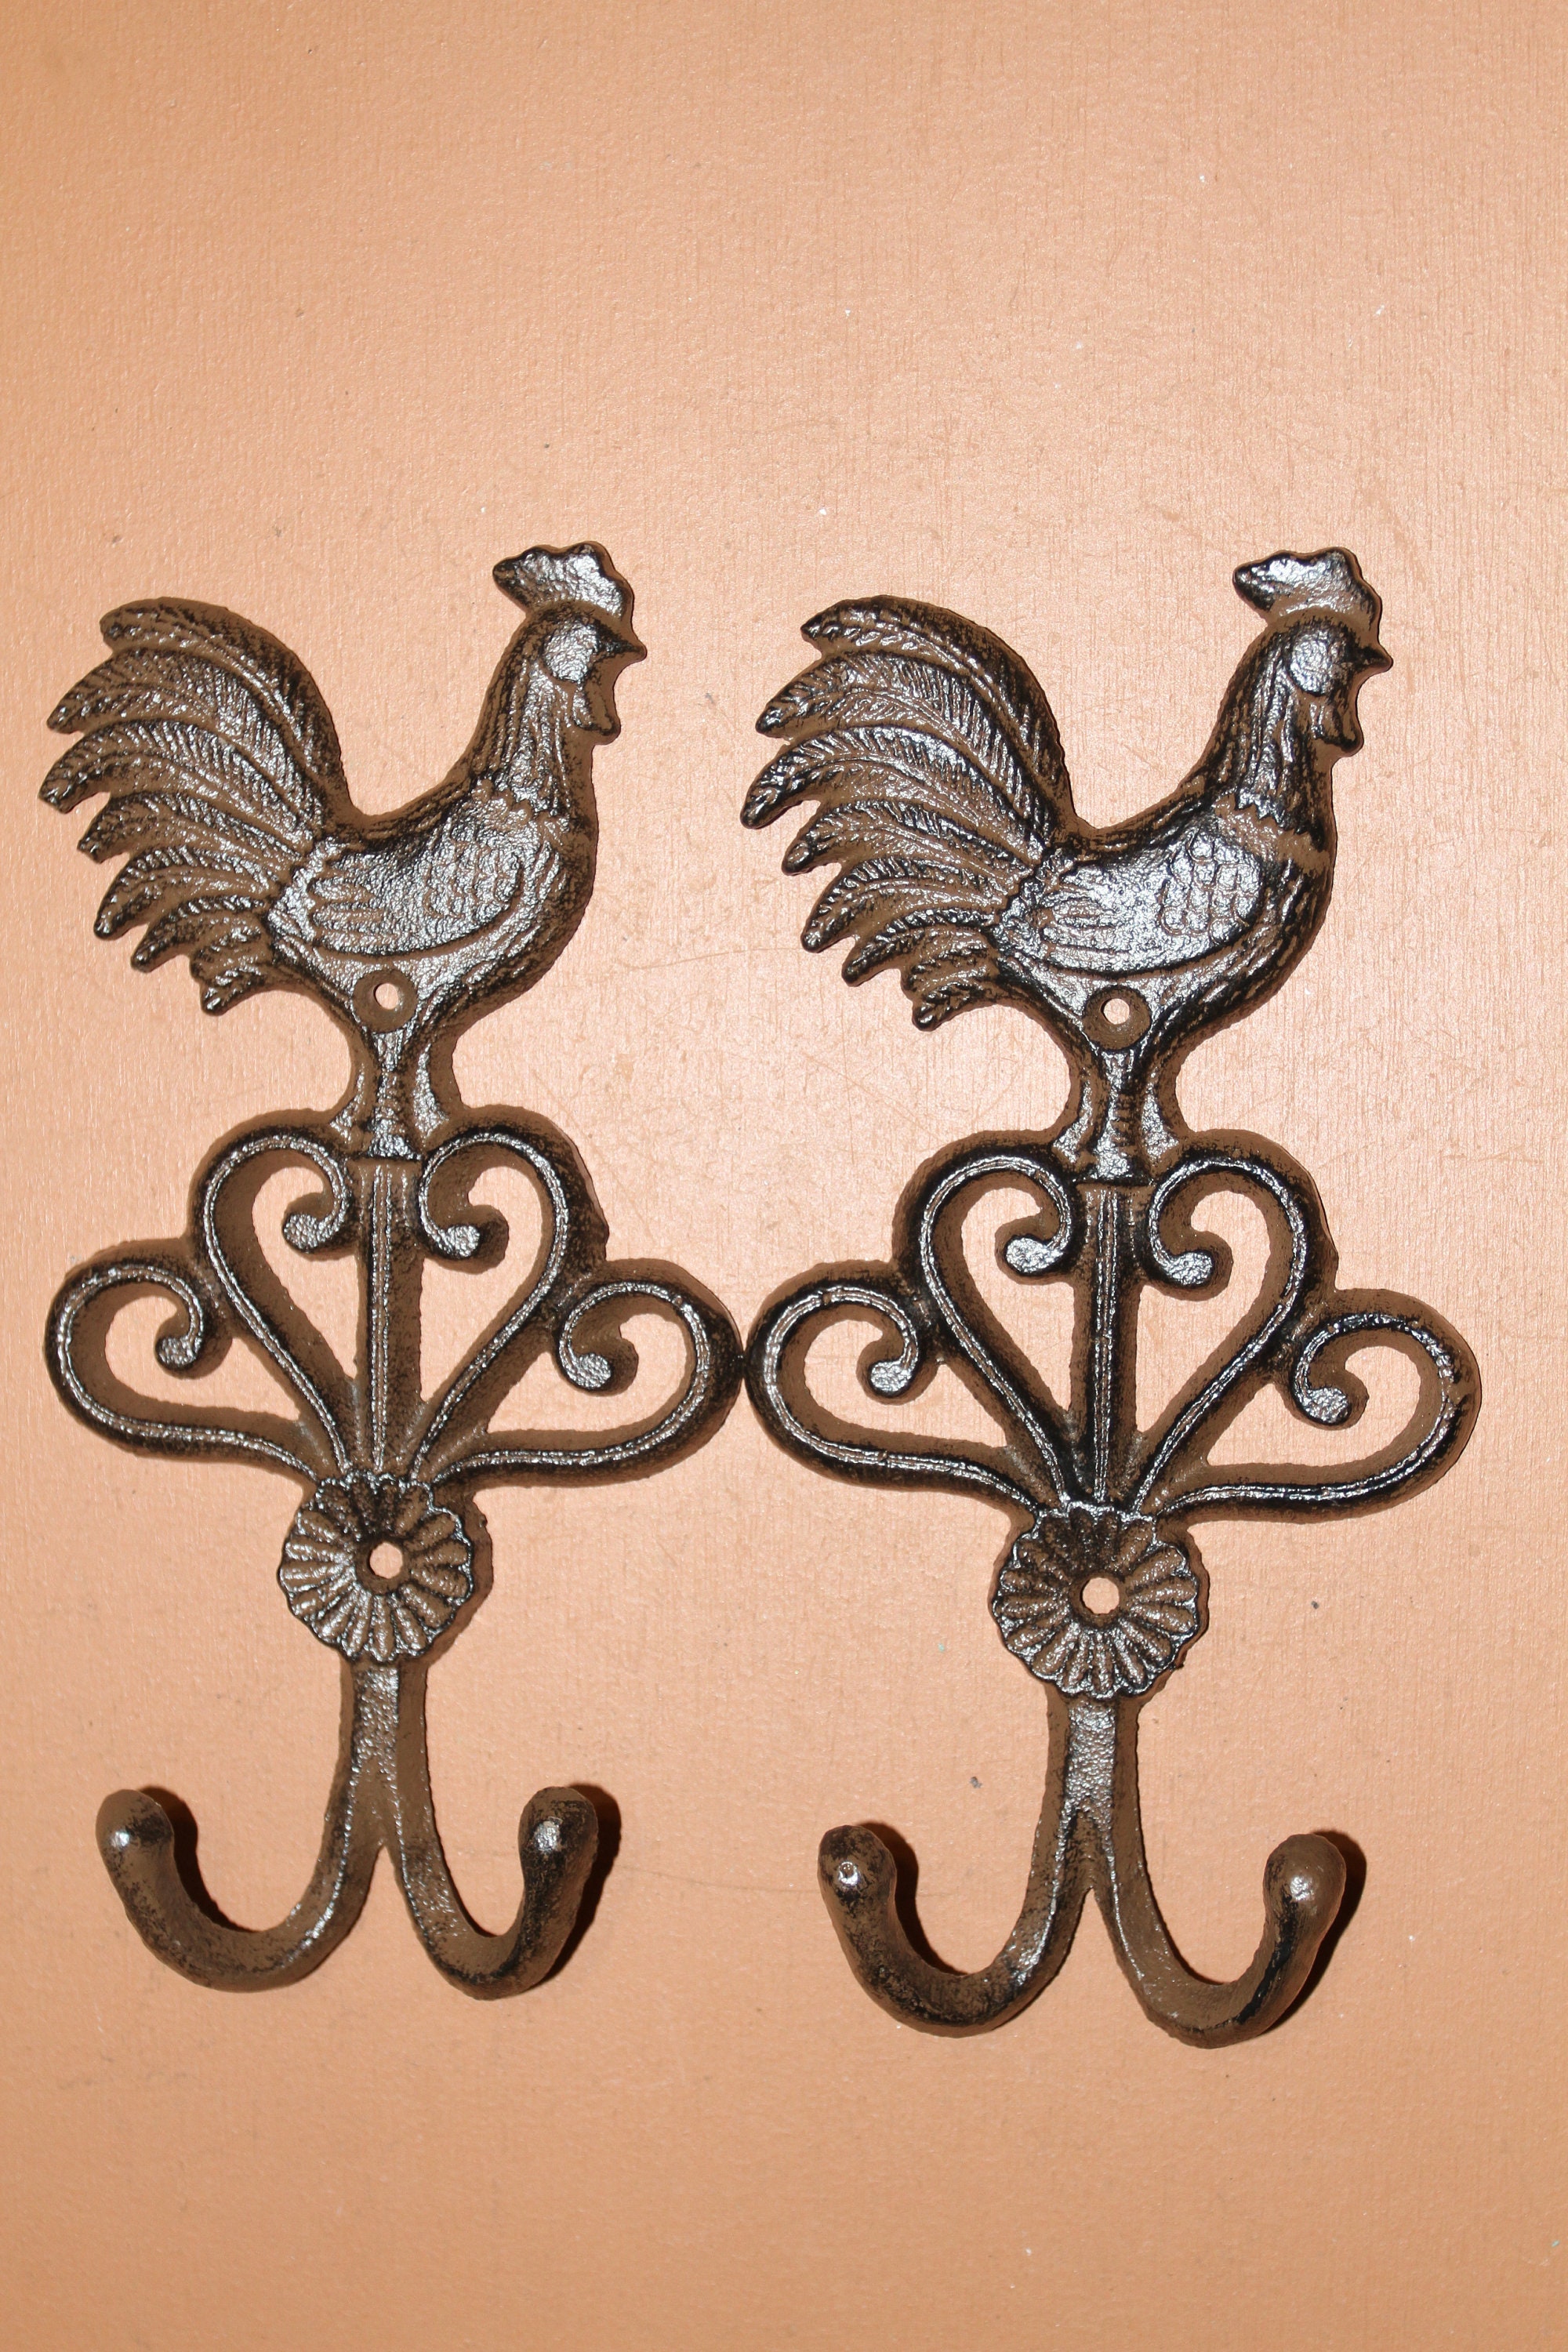 CHICKEN, Large, Double Wall Hook, Country Decor, Farm Decor, Home